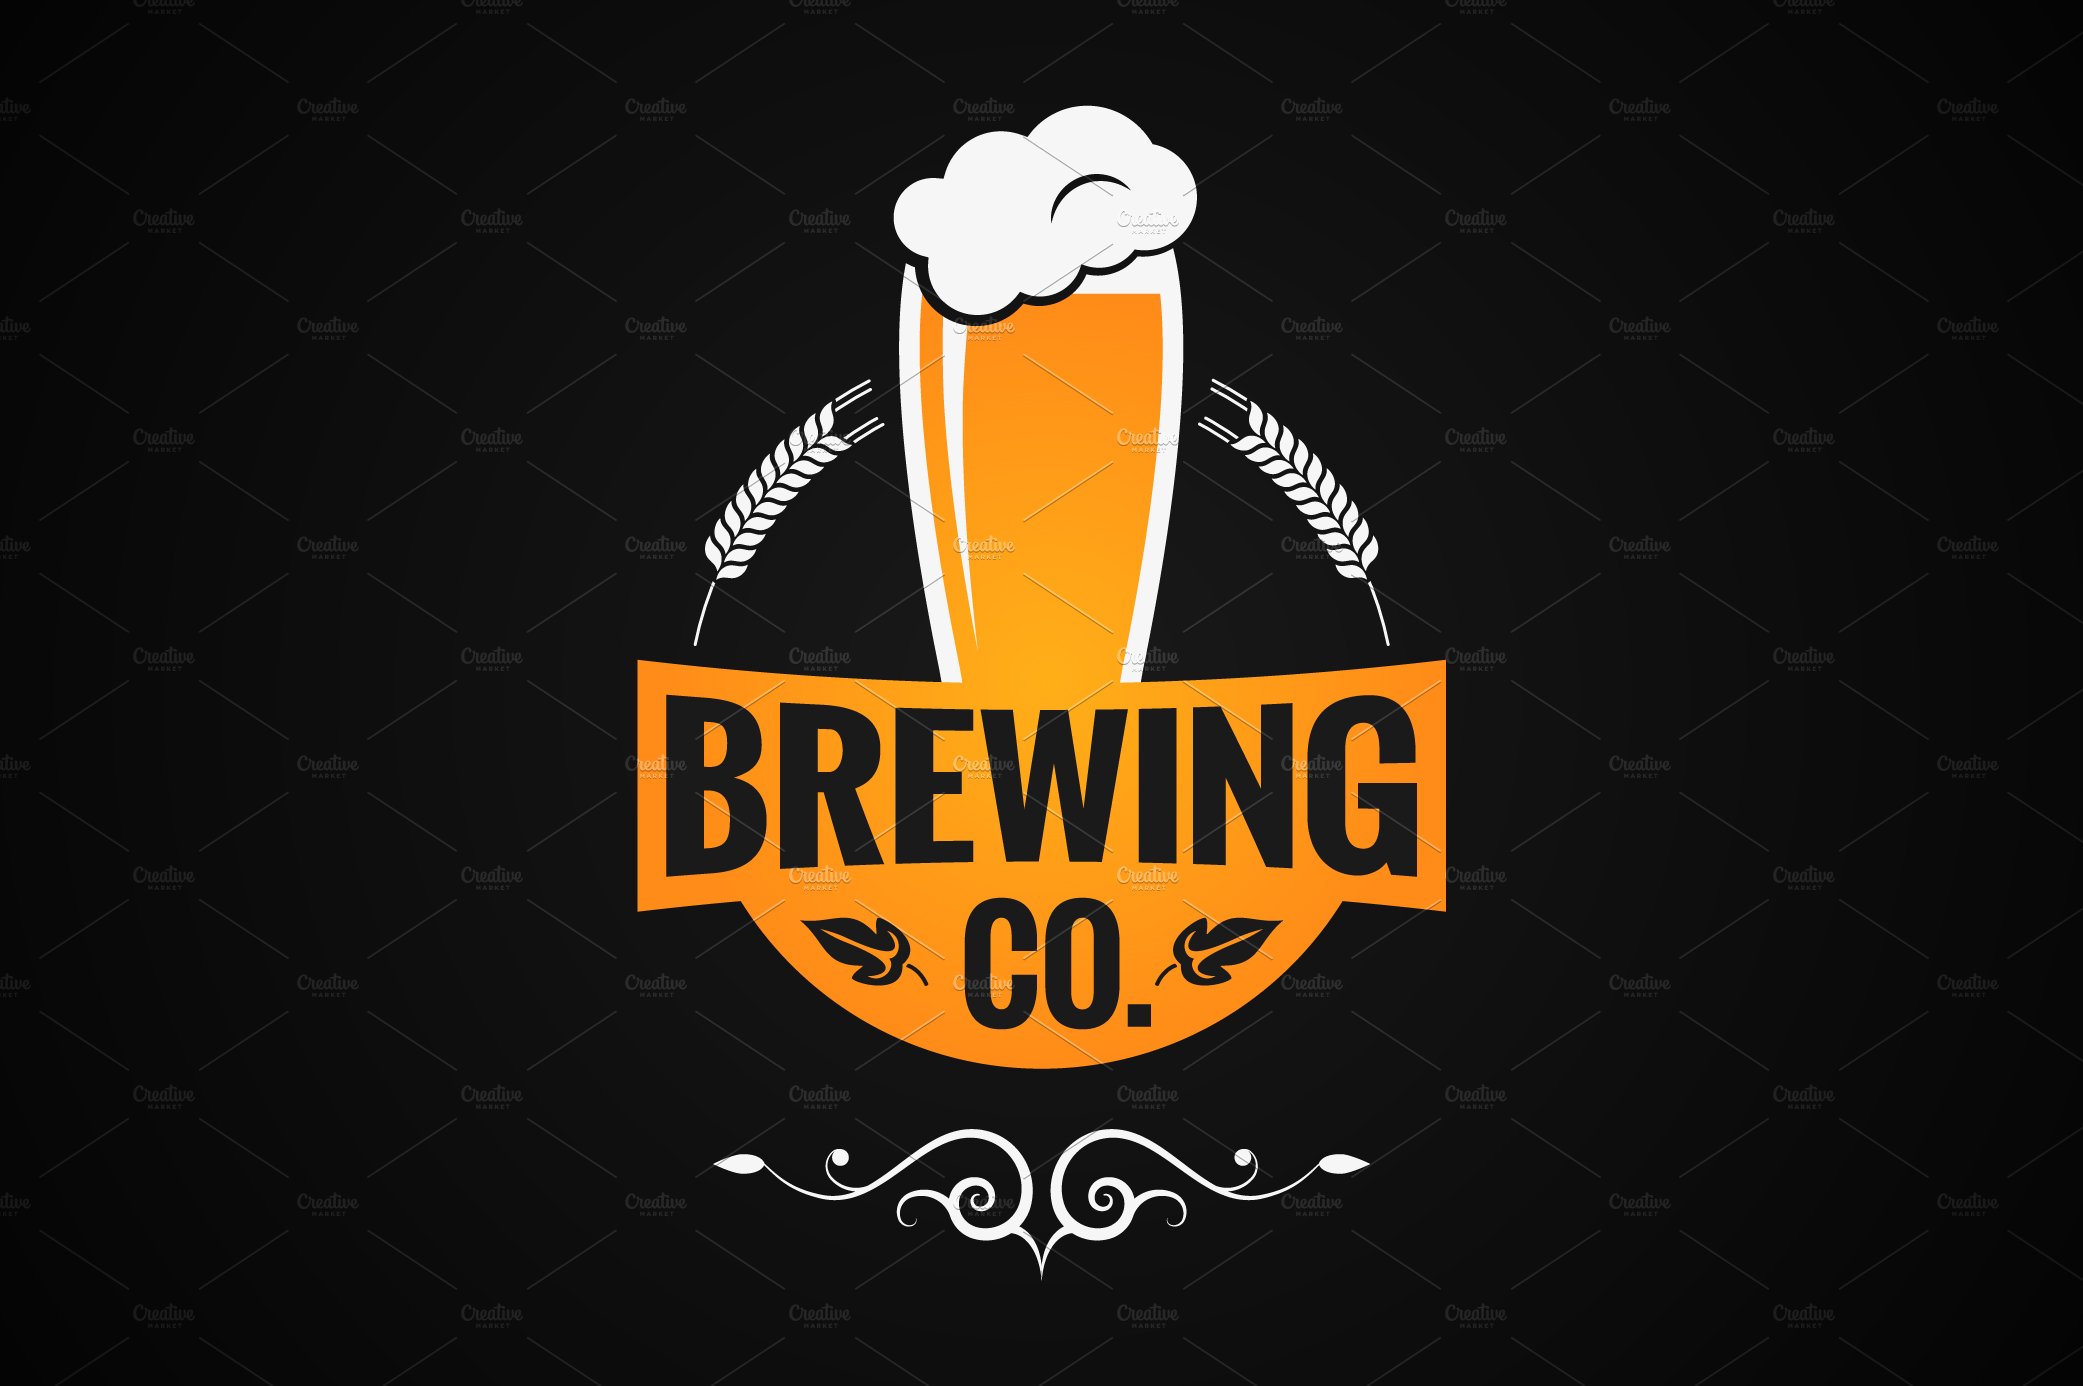 Beer Glass Logo. Brewing Company. cover image.